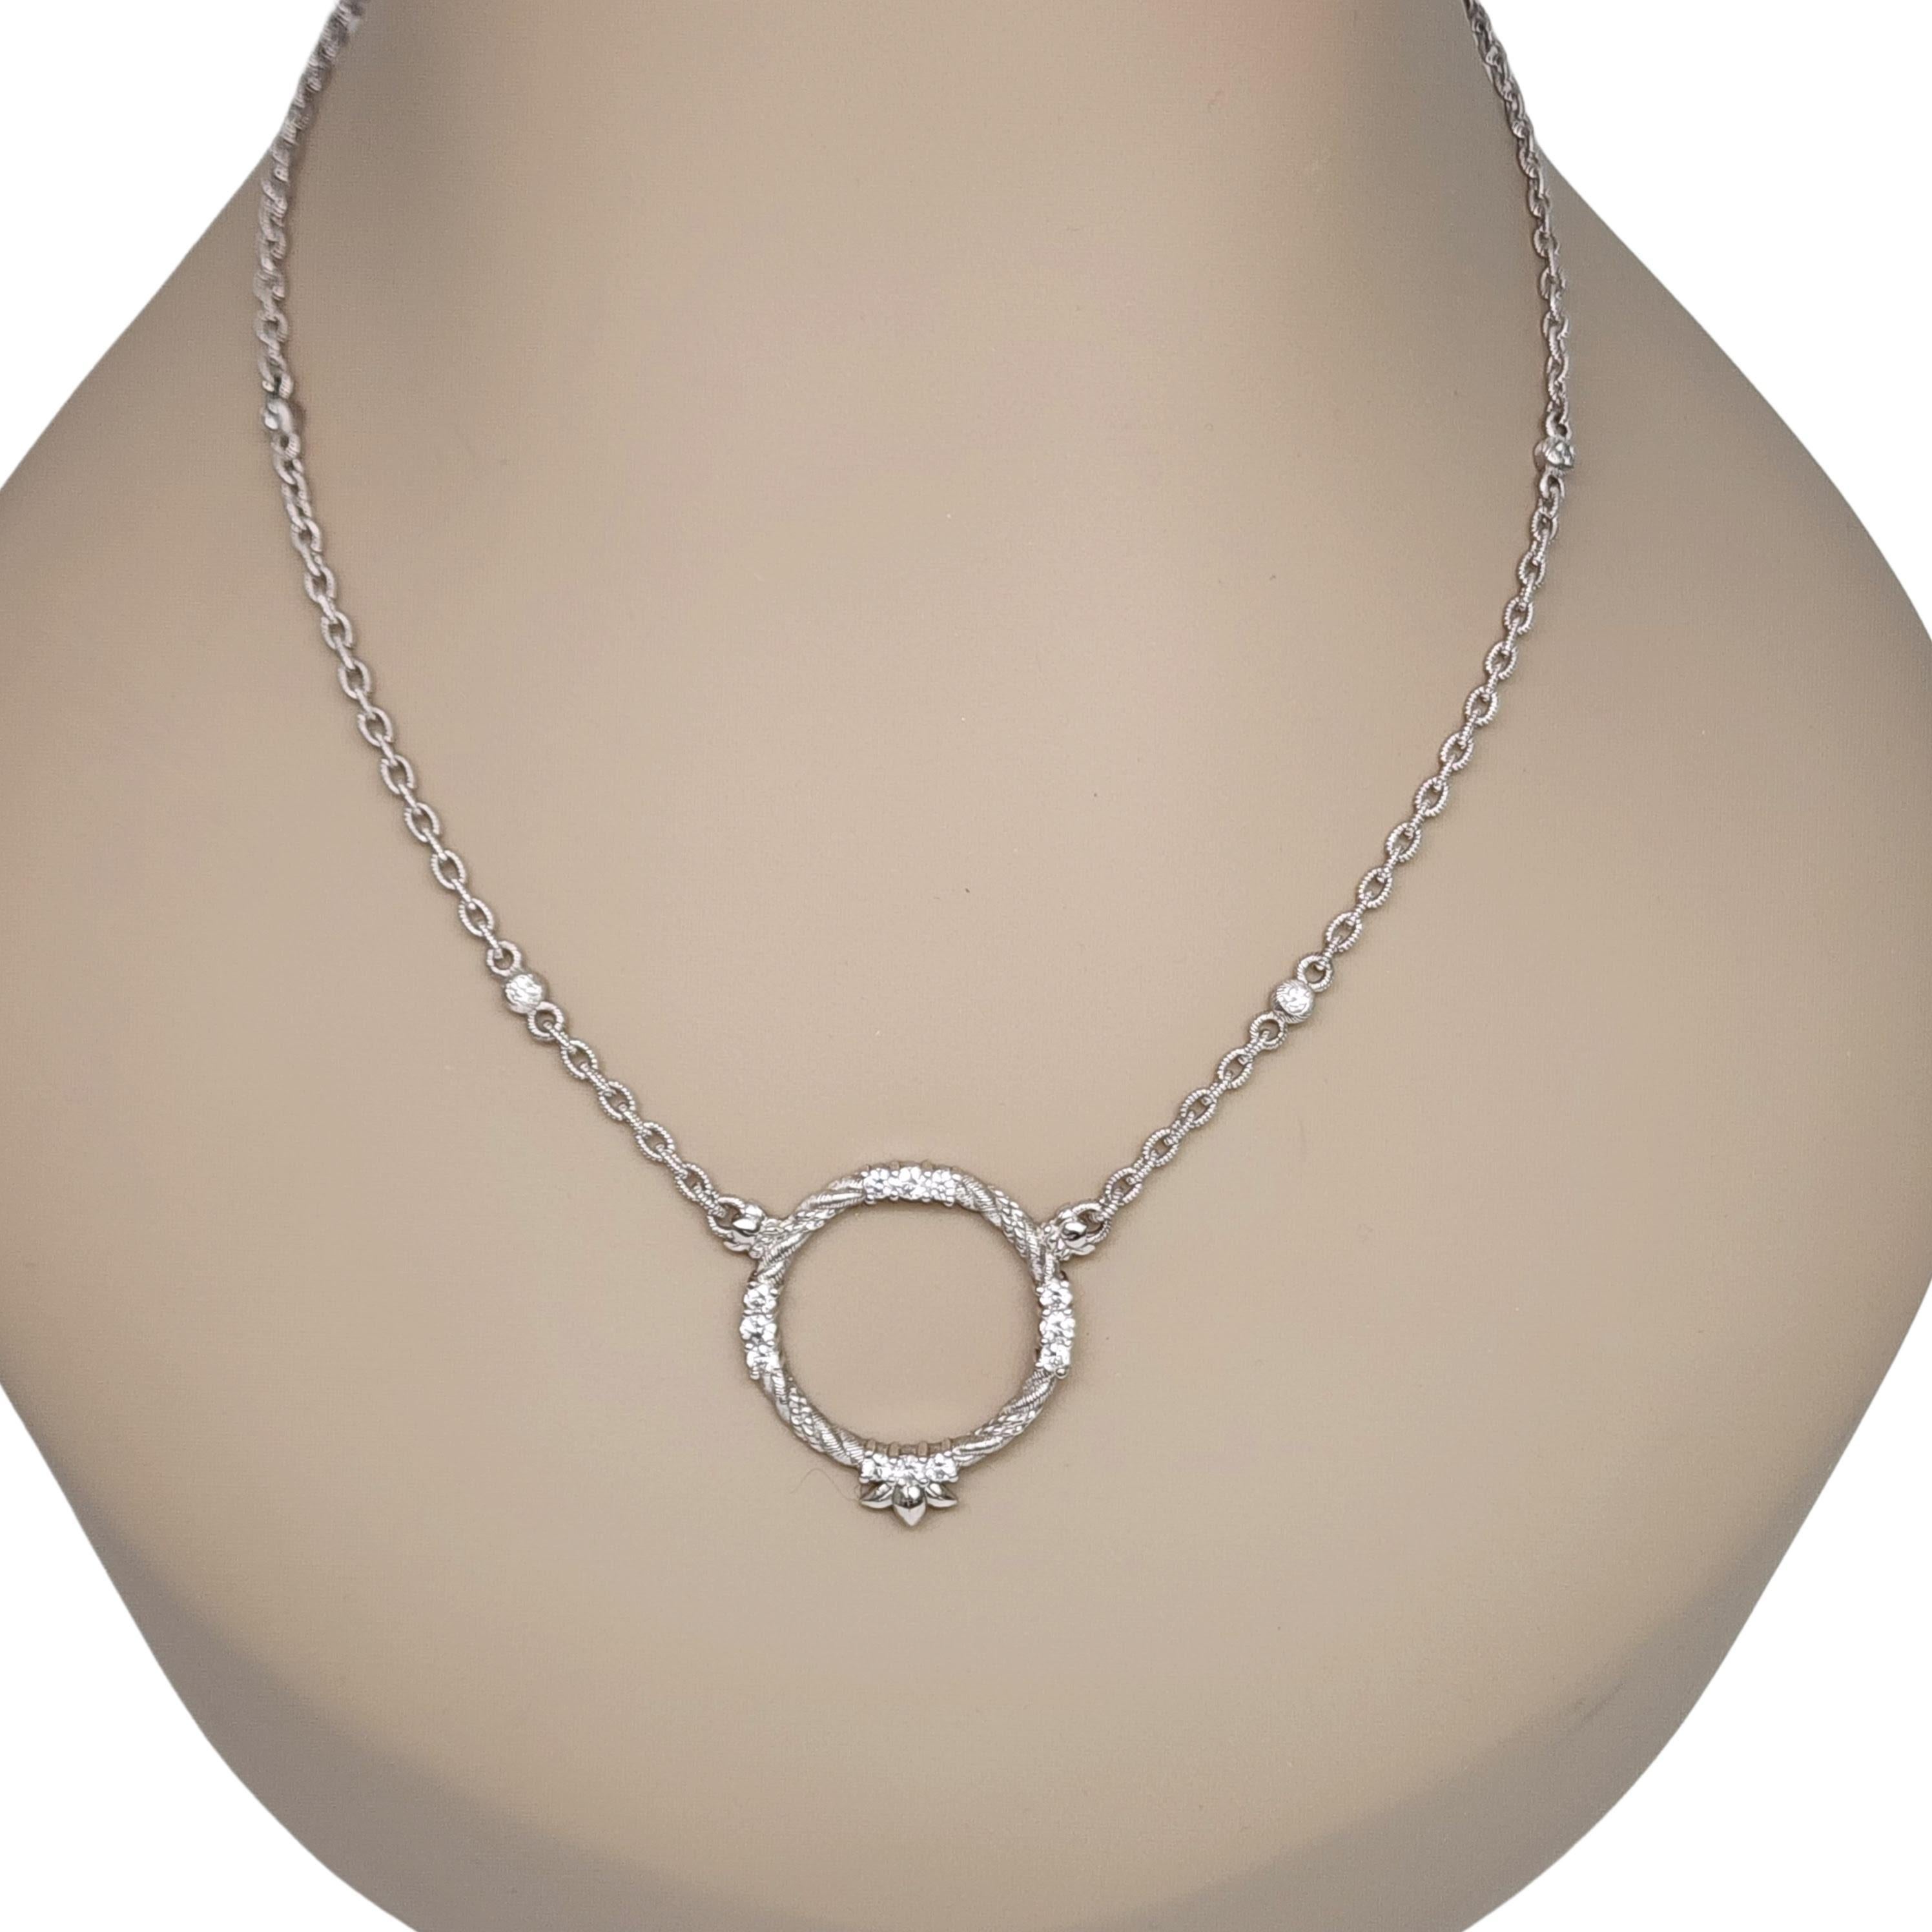 Judith Ripka Sterling Silver CZ Circle Pendant Heart Clasp Necklace #16609 For Sale 6